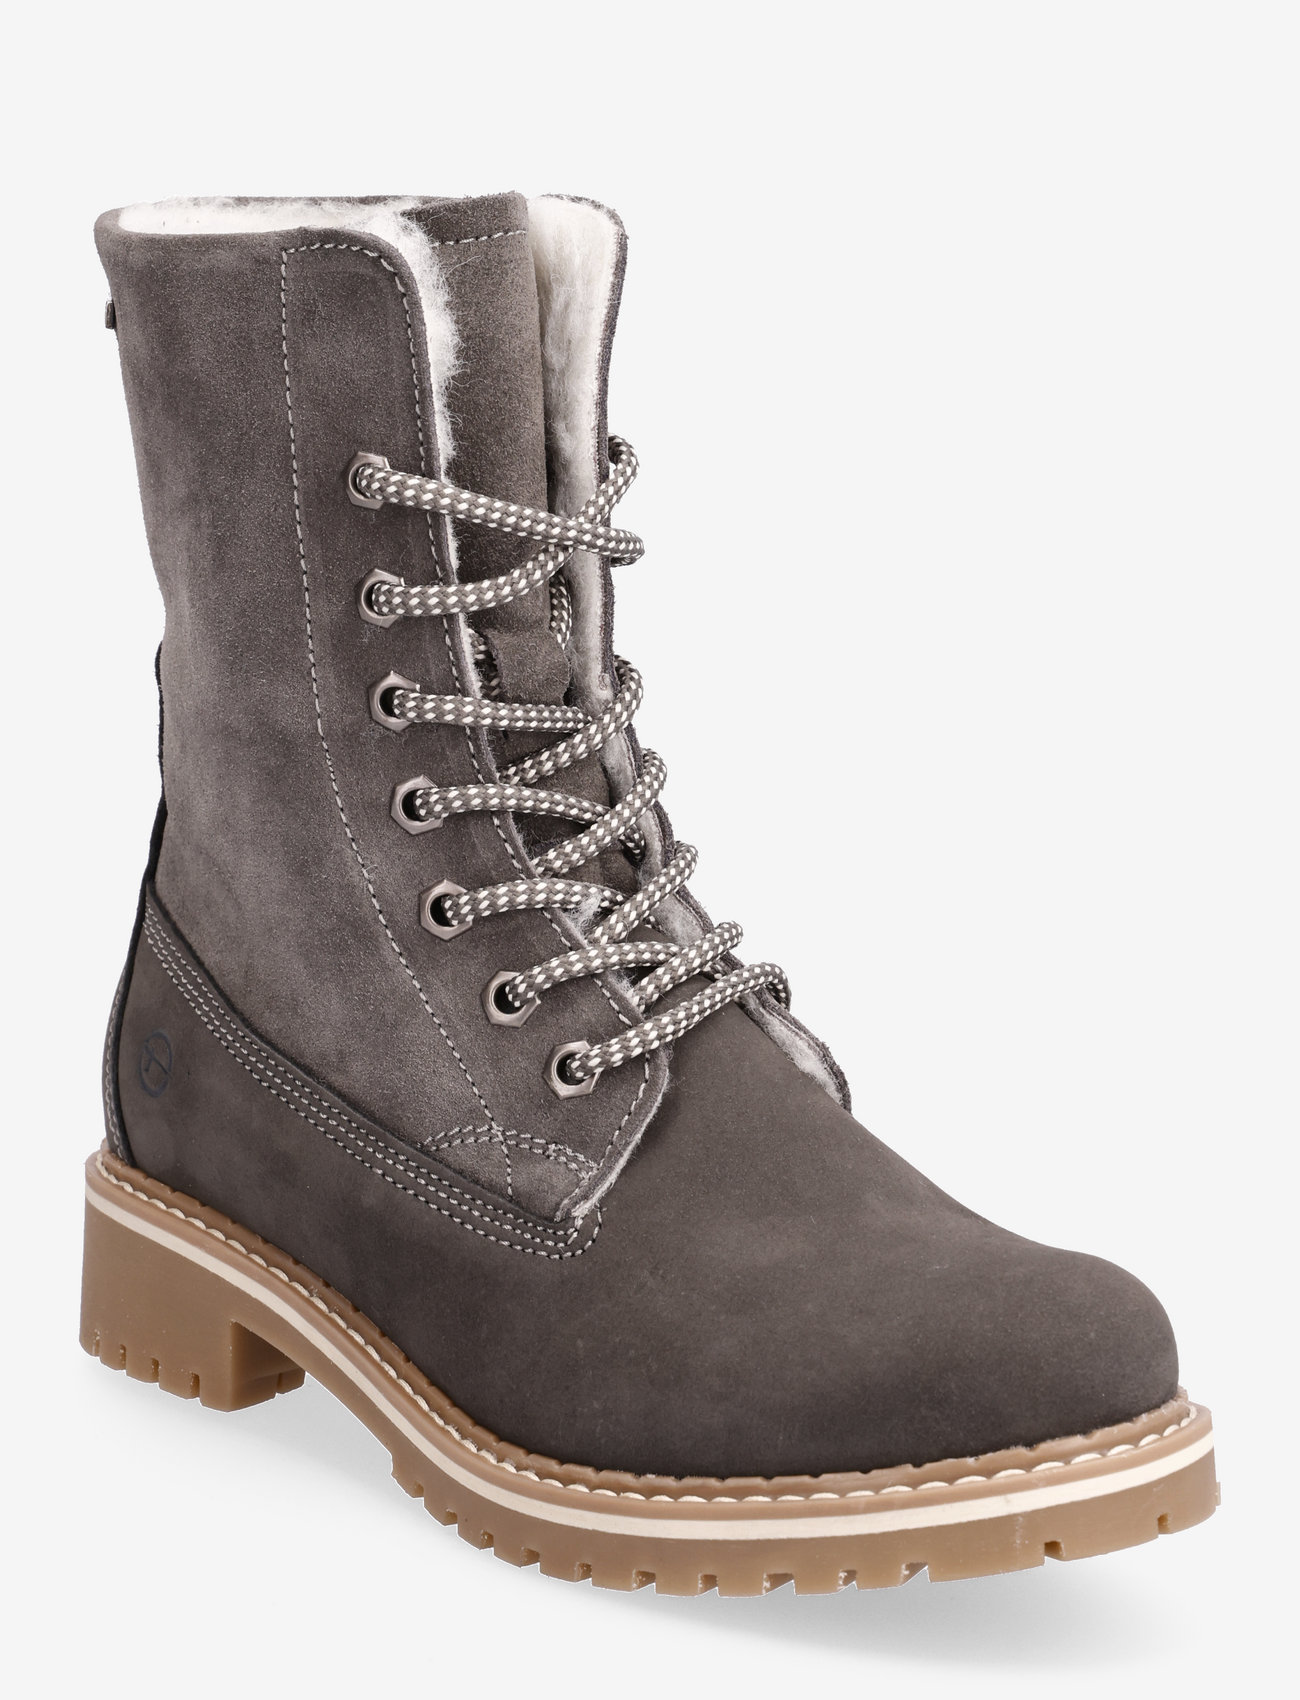 Tamaris - Woms Boots - winter shoes - anthracite - 0